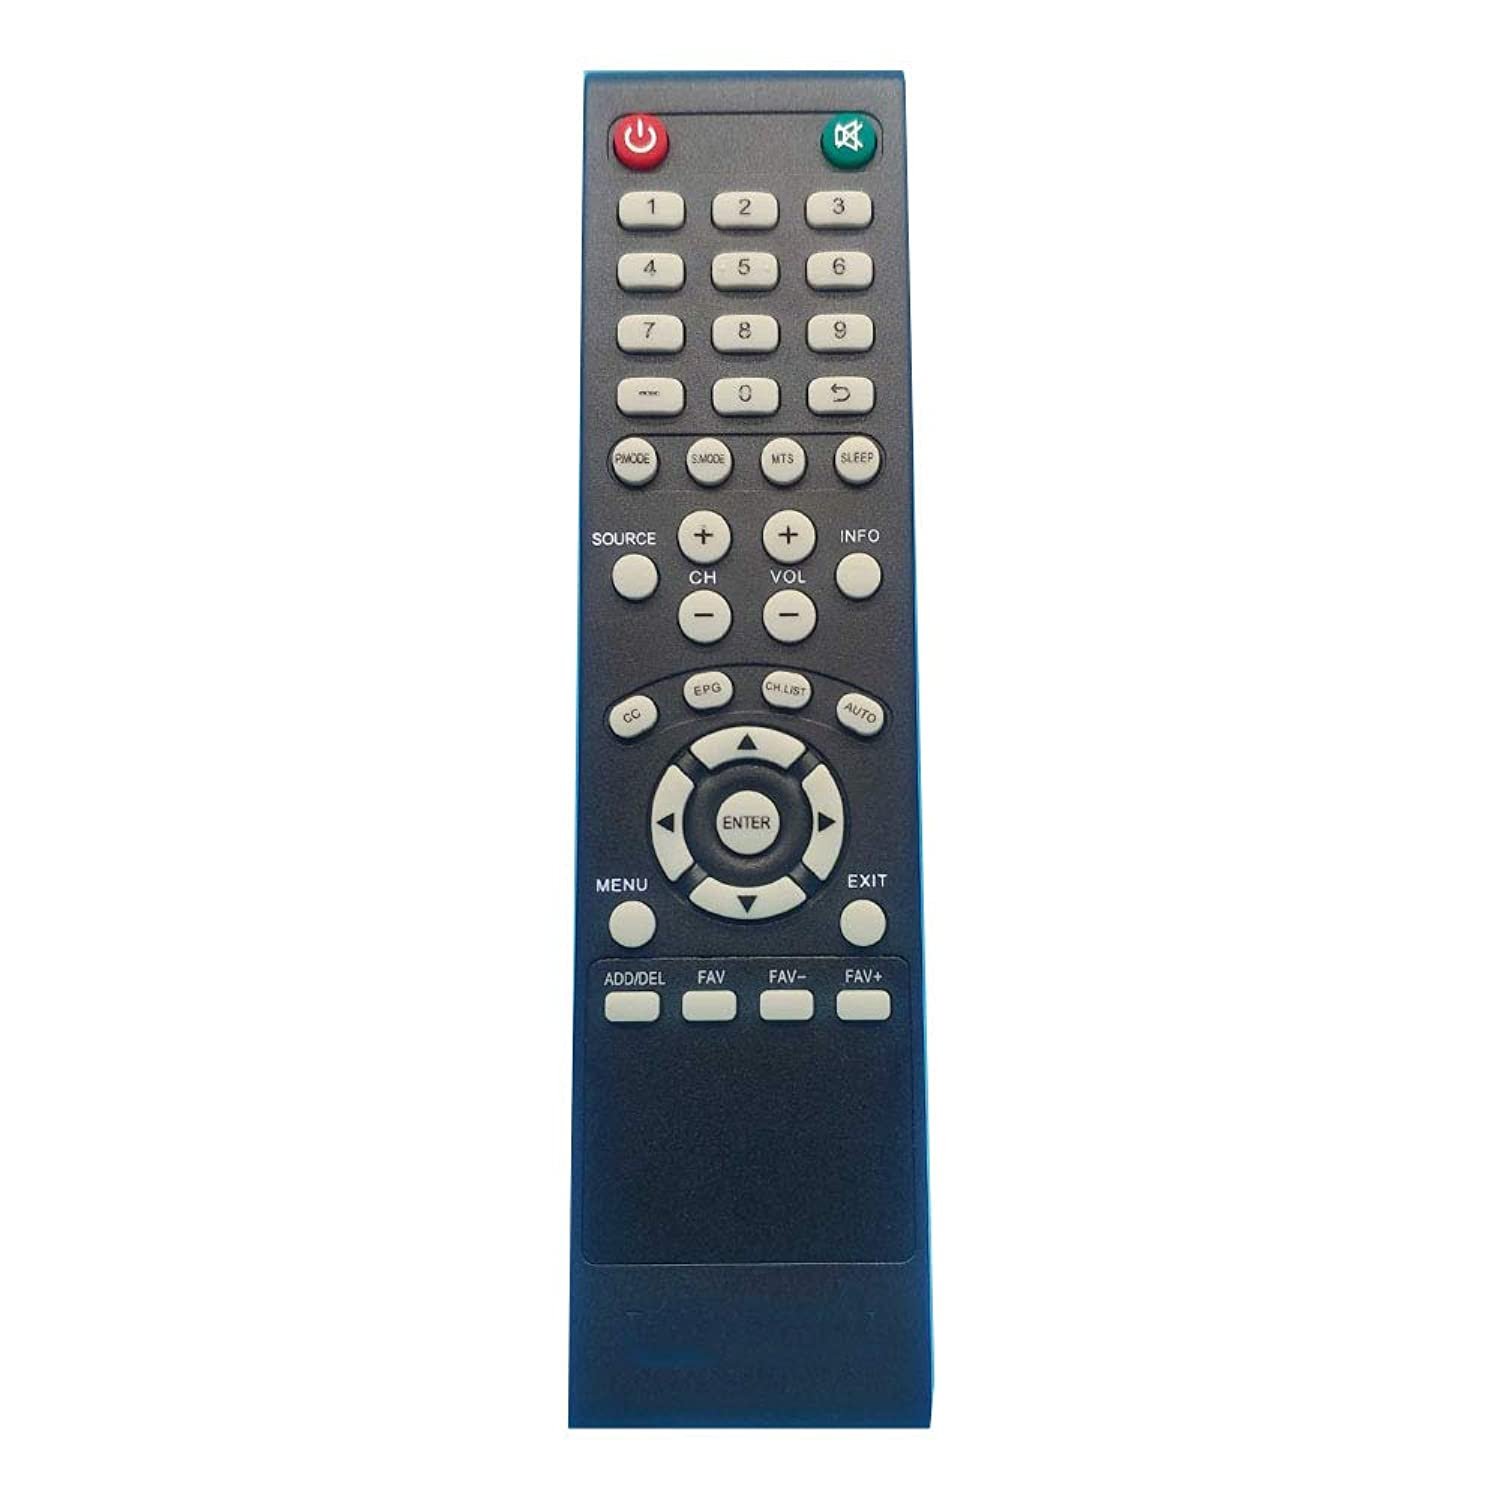 New Remote Control Fit For Proscan Tv Plded4331A Plded4897A Pled4897A Plded5066A Plded506